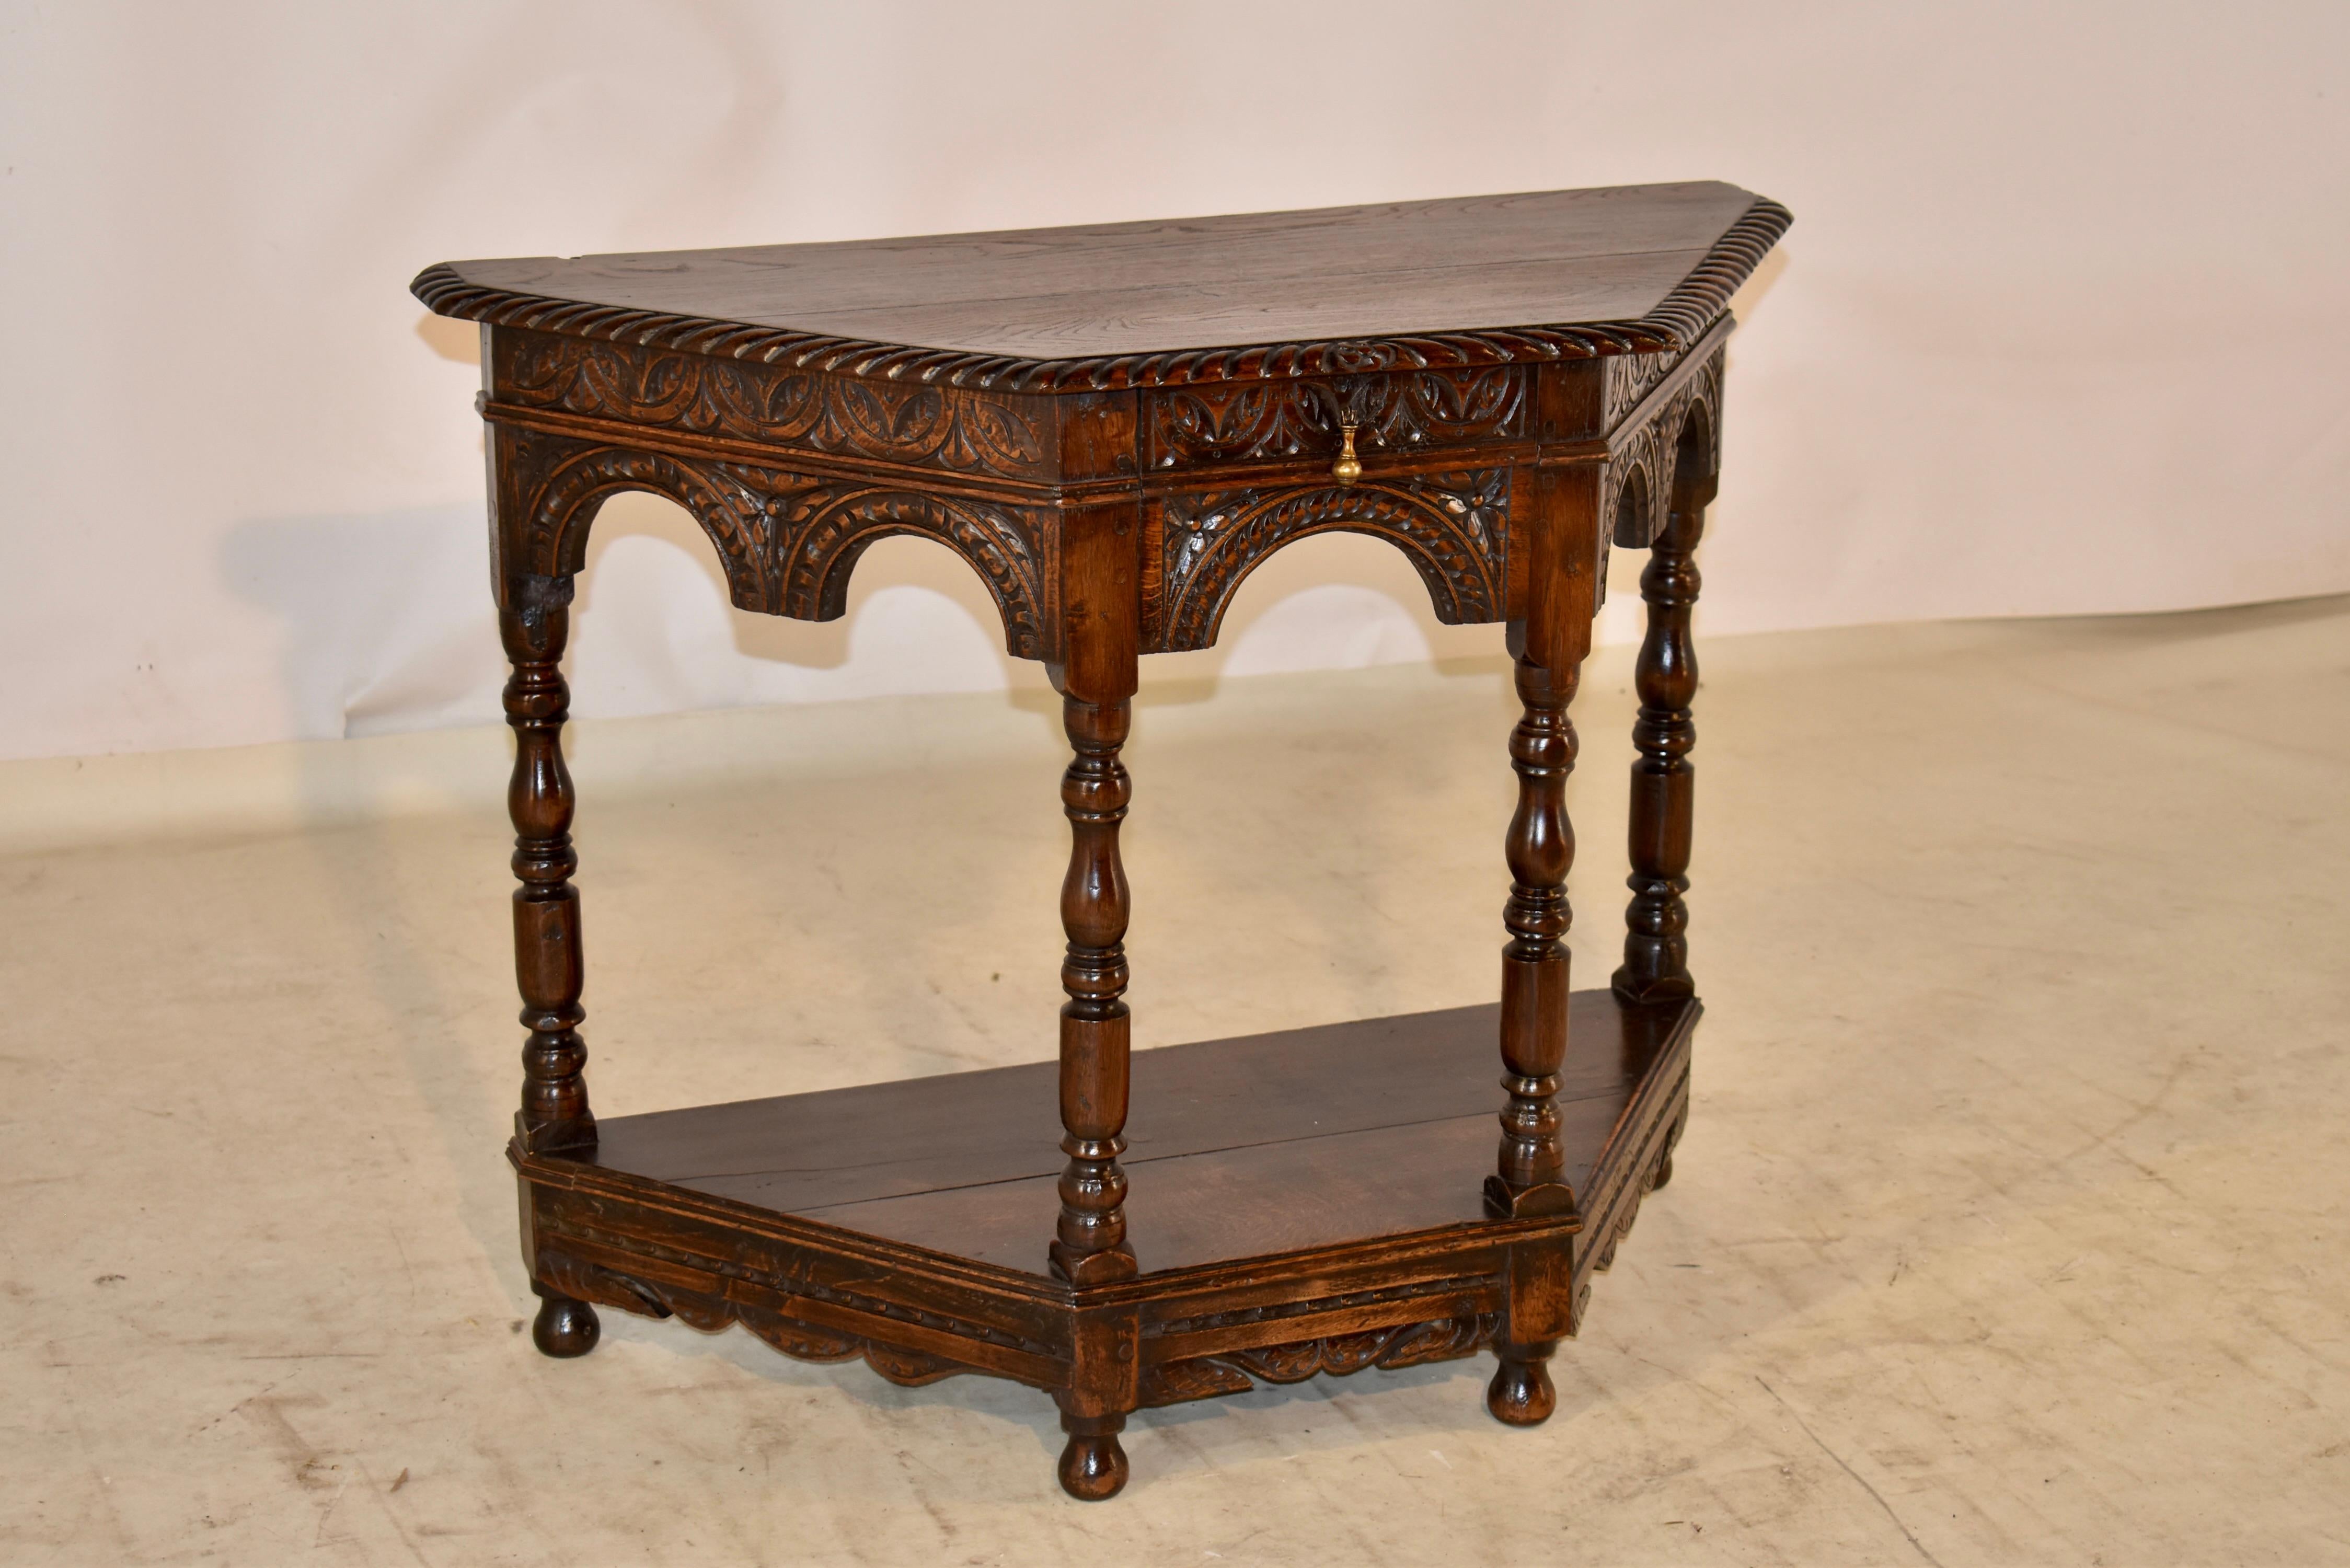 18th Century oak console or side table from England. The table has a two plank top with a hand carved and beveled edge, following down to a wonderfully hand carve decorated apron which is hand scalloped and has lovely arched details as well. The